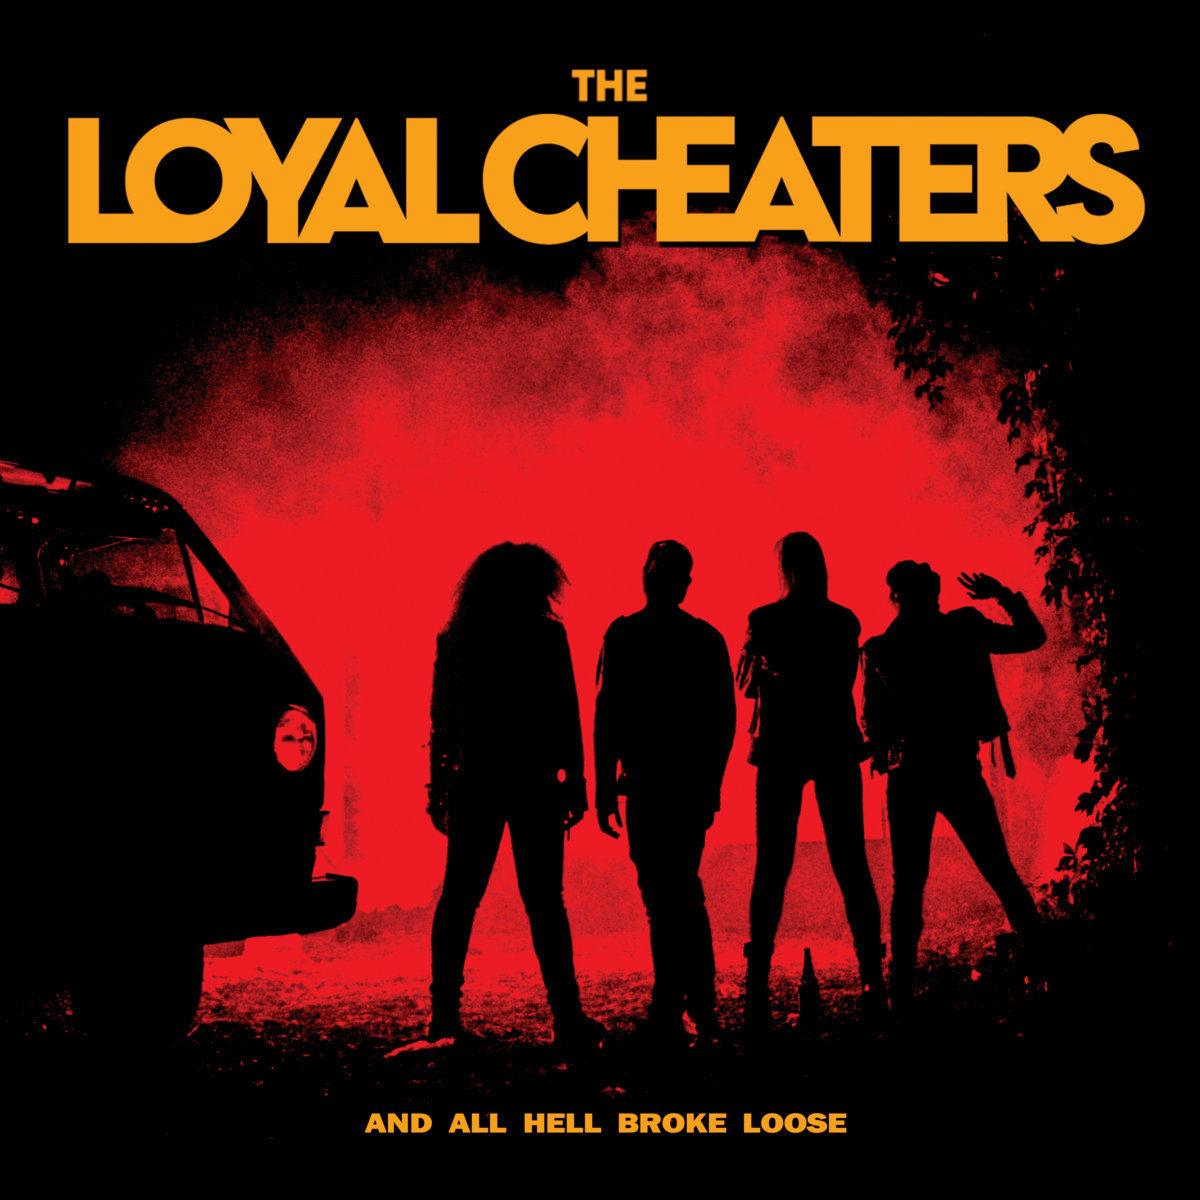 🎤 The Loyal Cheaters
💿 And All Hell Broke Loose
⌛️ 35:15
🎸 Rock 'n' Roll
🌍 Italia 🇮🇹
📅 26-04-24 🆕
➡️ theloyalcheaters.bandcamp.com/album/and-all-…
➡️ open.spotify.com/intl-es/album/…
📄 
🌐 facebook.com/theloyalcheate…
🌐 instagram.com/theloyalcheate…

#SepulMetal #SepulRecommended #HeardAndShared  #GoDownRecords